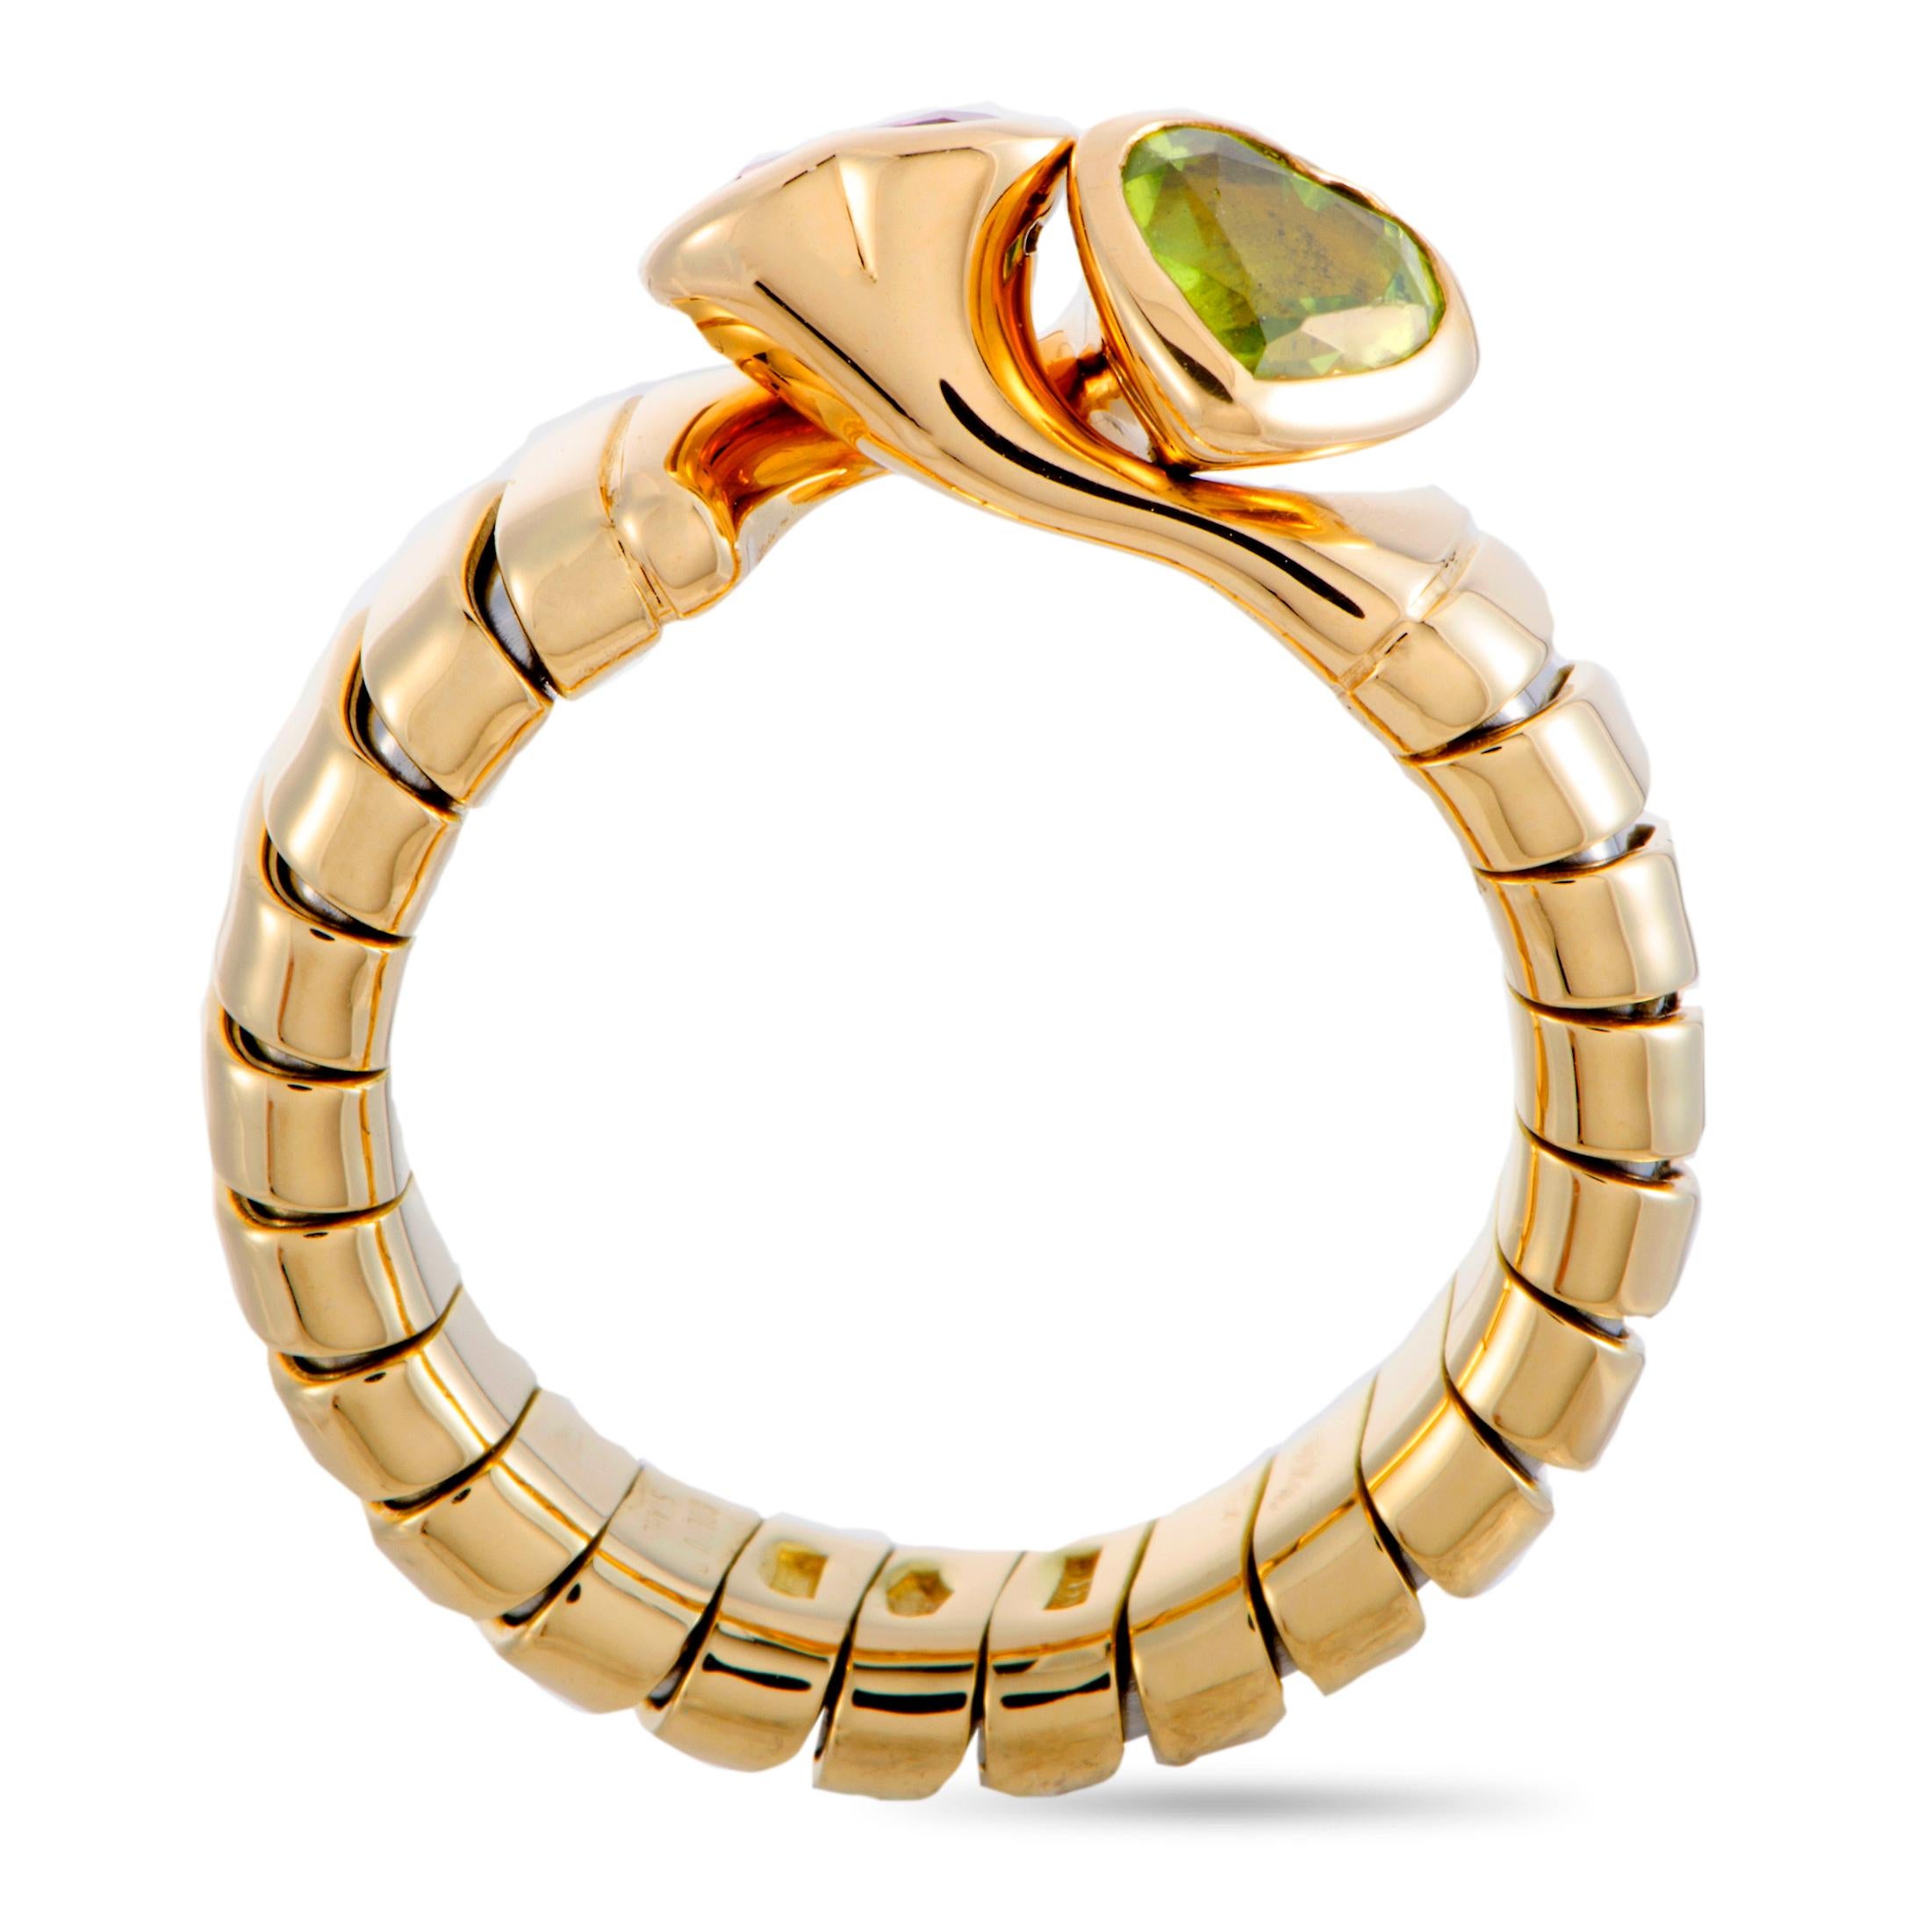 This Bvlgari ring is crafted from 18K yellow gold and set with a peridot and a tourmaline. The ring weighs 8.4 grams, boasting band thickness of 5 mm and top height of 6 mm, while top dimensions measure 8 by 11 mm.

Offered in estate condition, this